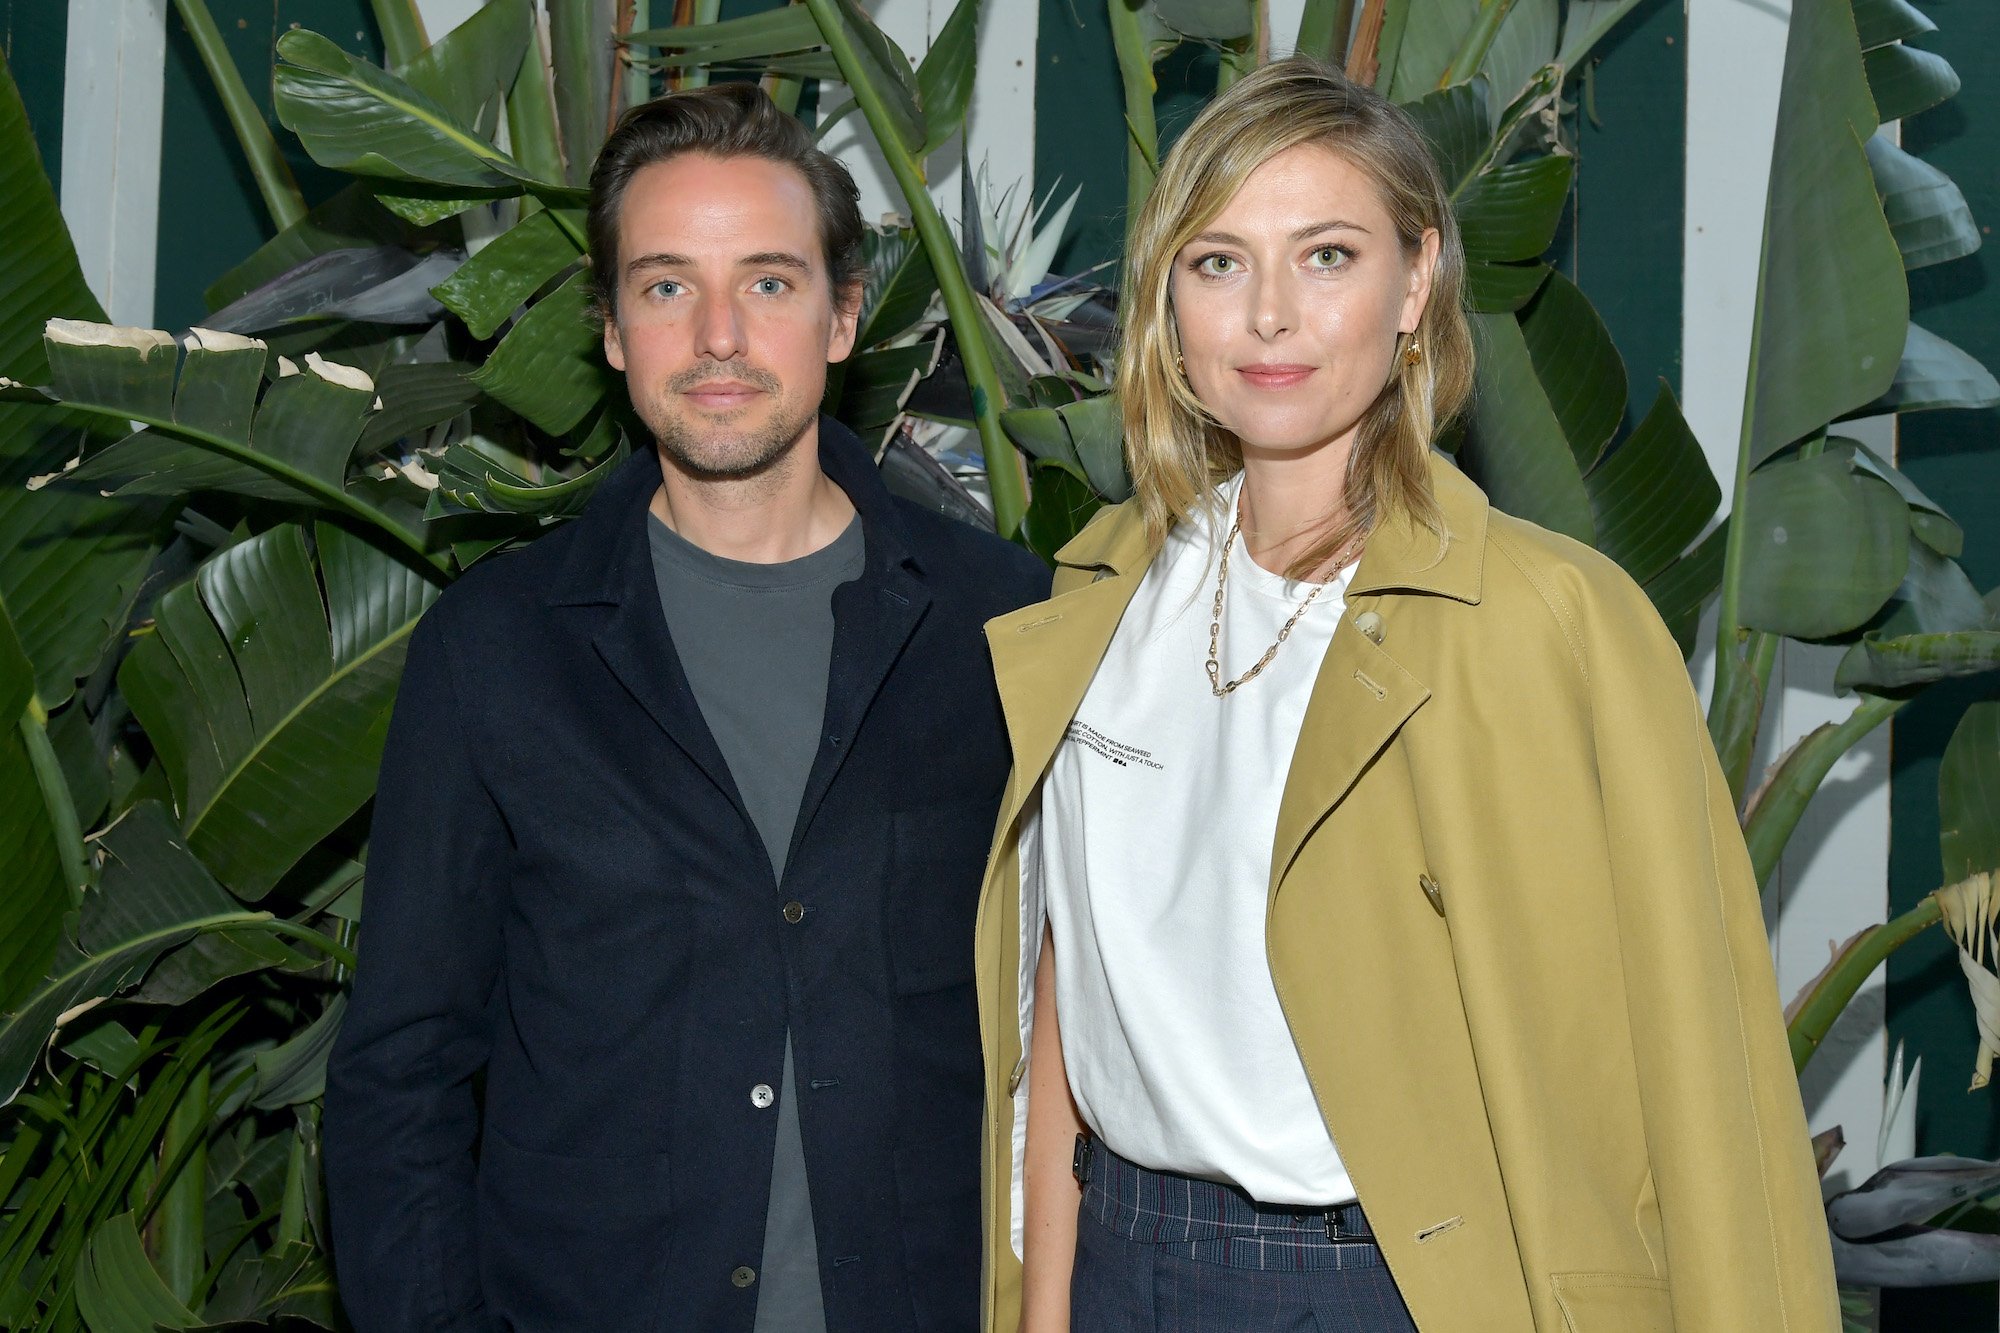 (L-R) Alexander Gilkes and Maria Sharapova smiling in front of a plant